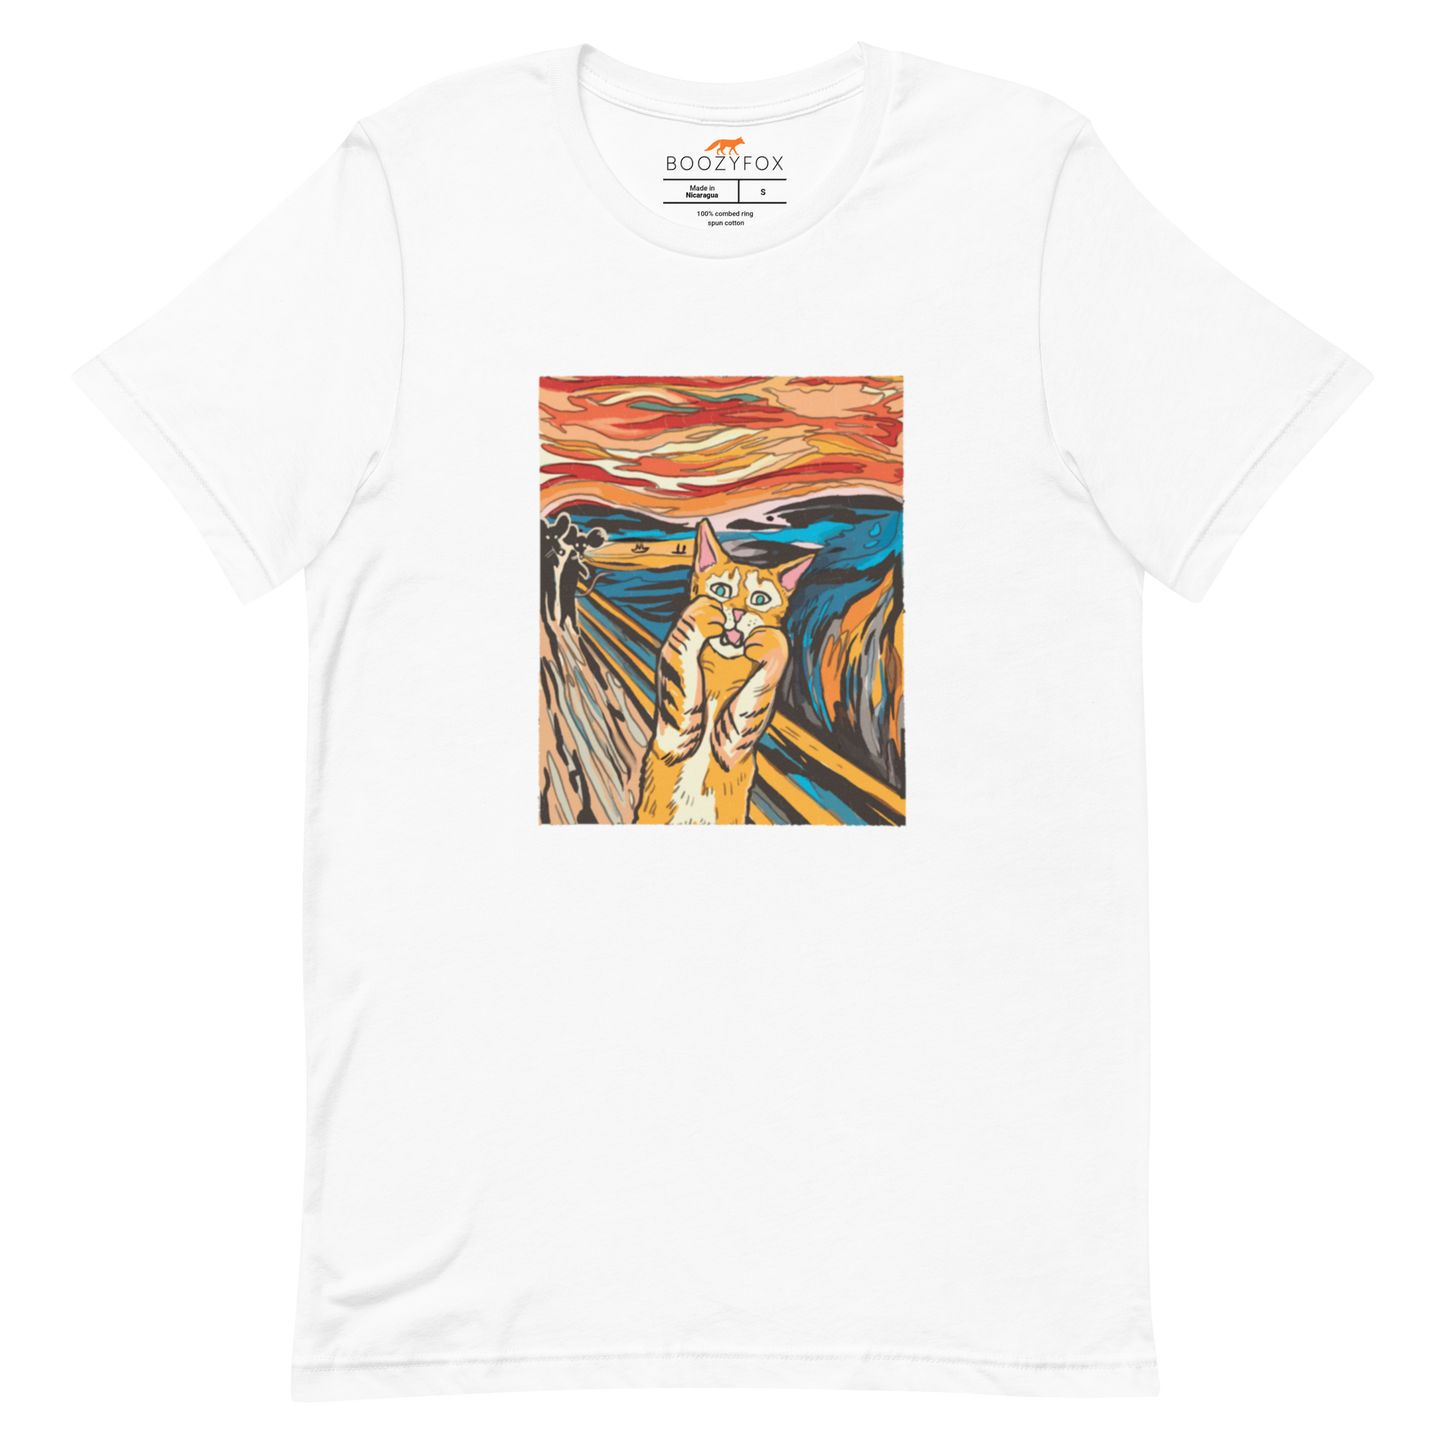 White Premium Screaming Cat T-Shirt showcasing iconic The Screaming Cat graphic on the chest - Funny Graphic Cat Tees - Boozy Fox